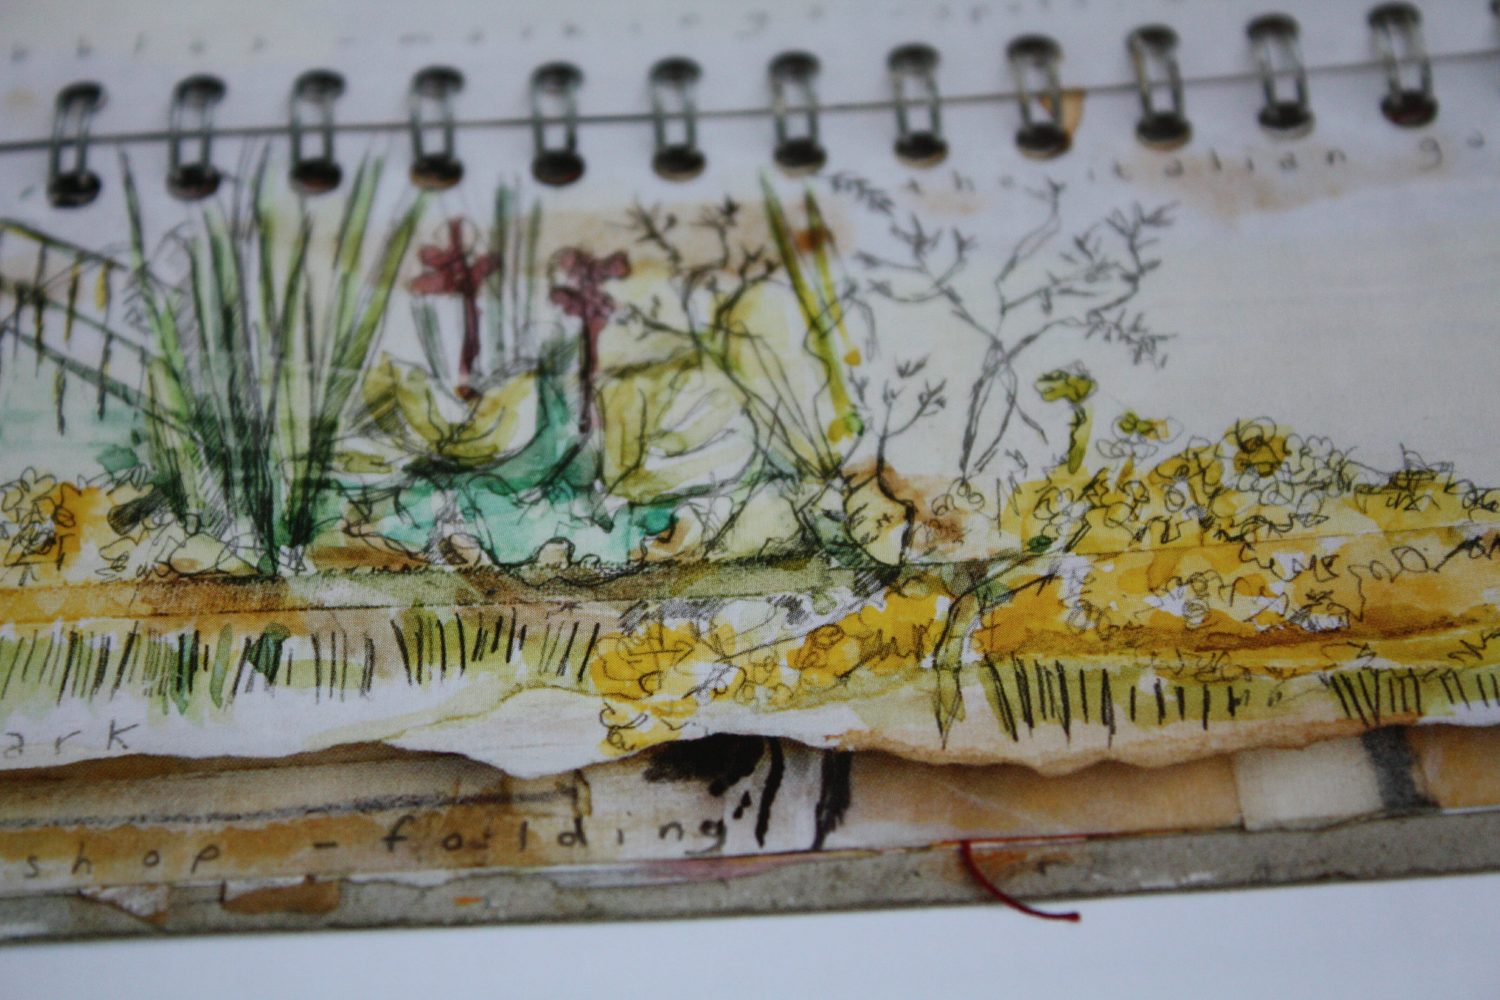 Sketchbook Explorations by Shelley Rhodes